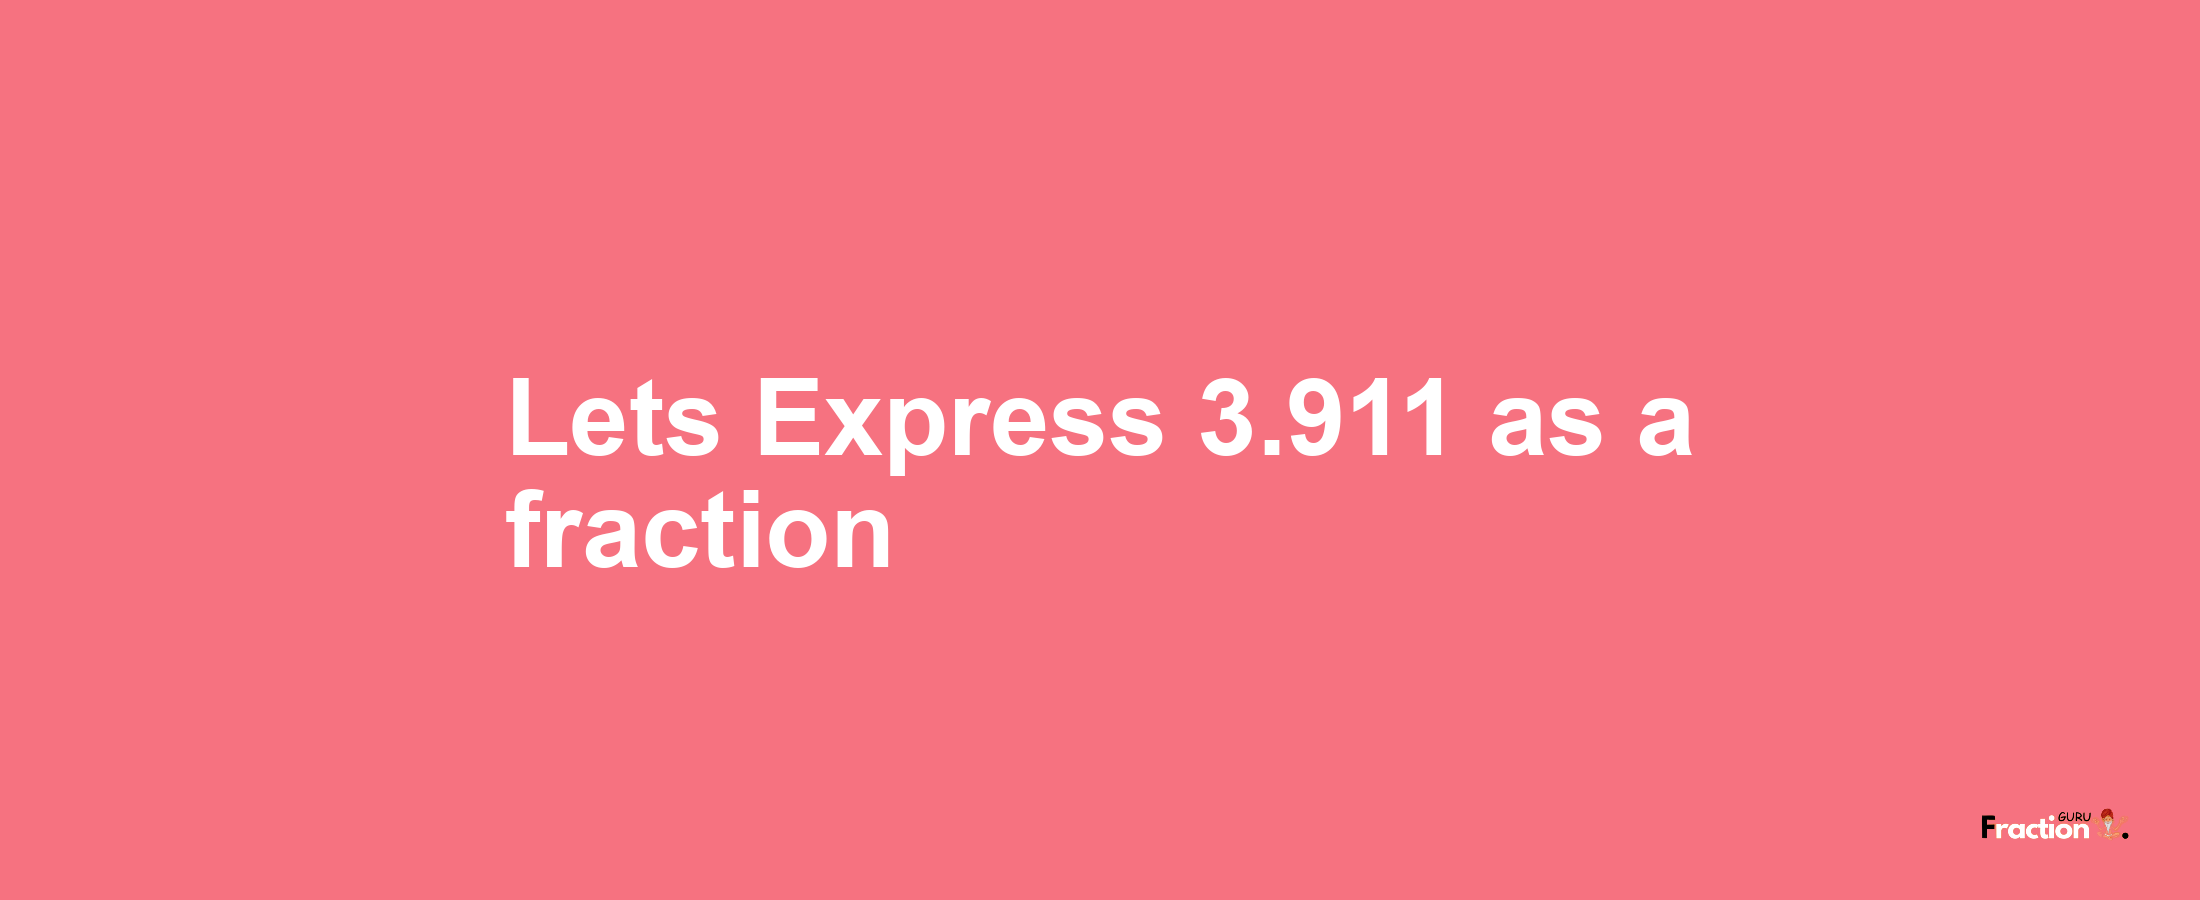 Lets Express 3.911 as afraction